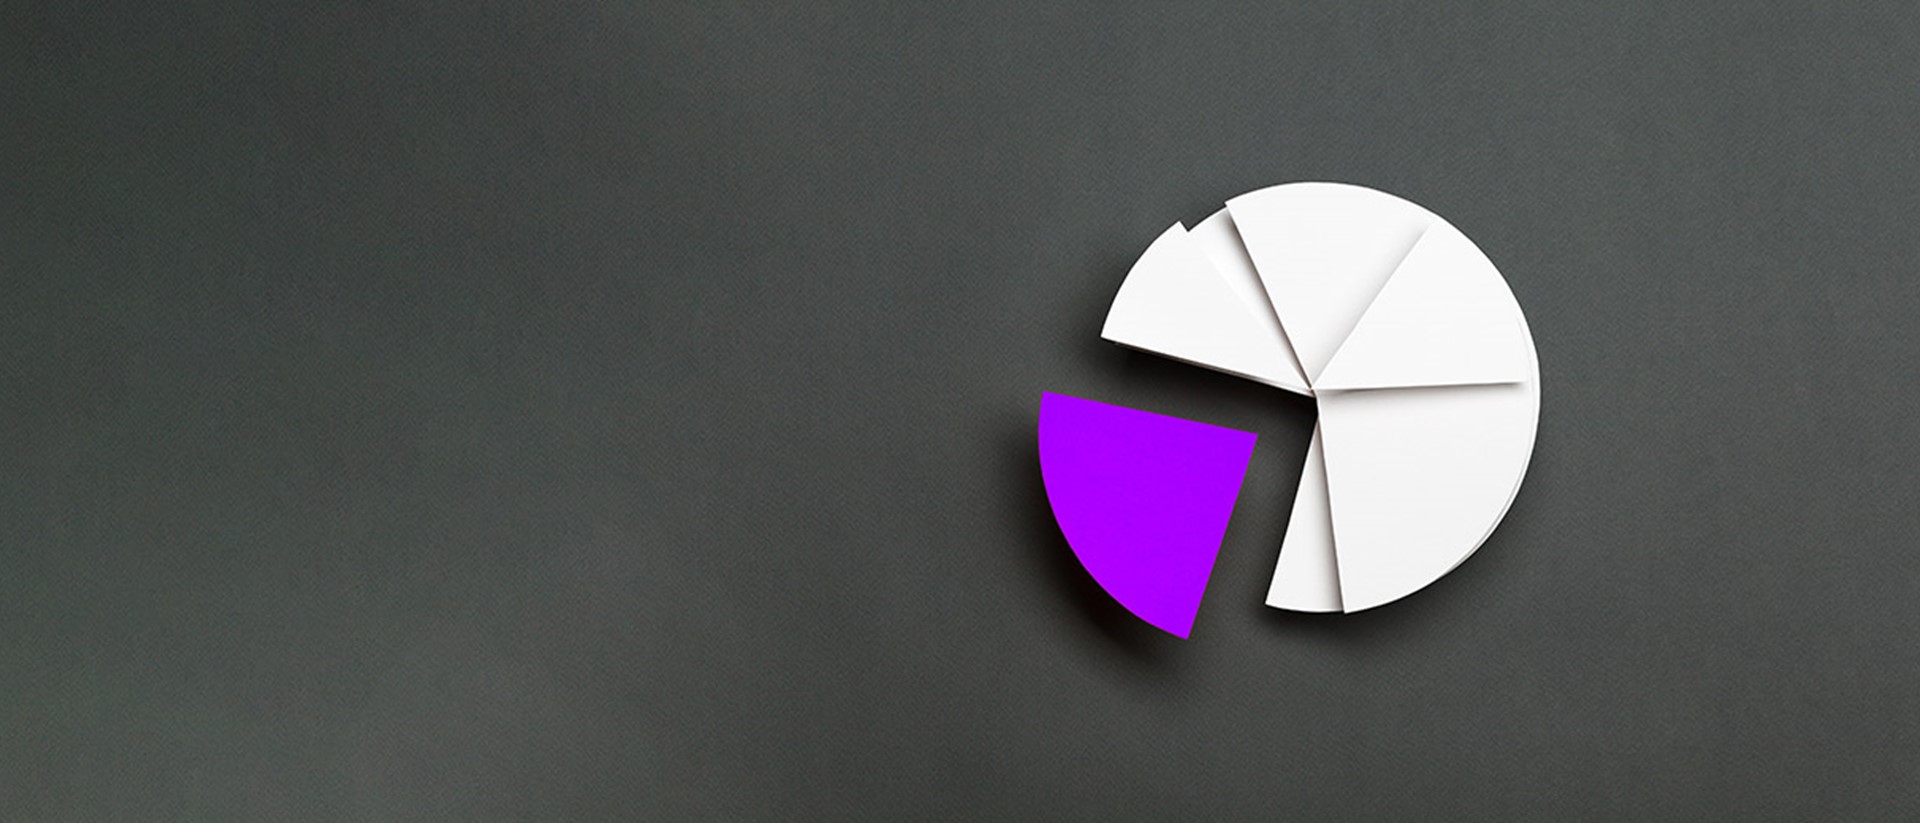 Image of a white pie chart with a purple slice taken out of it on a black background